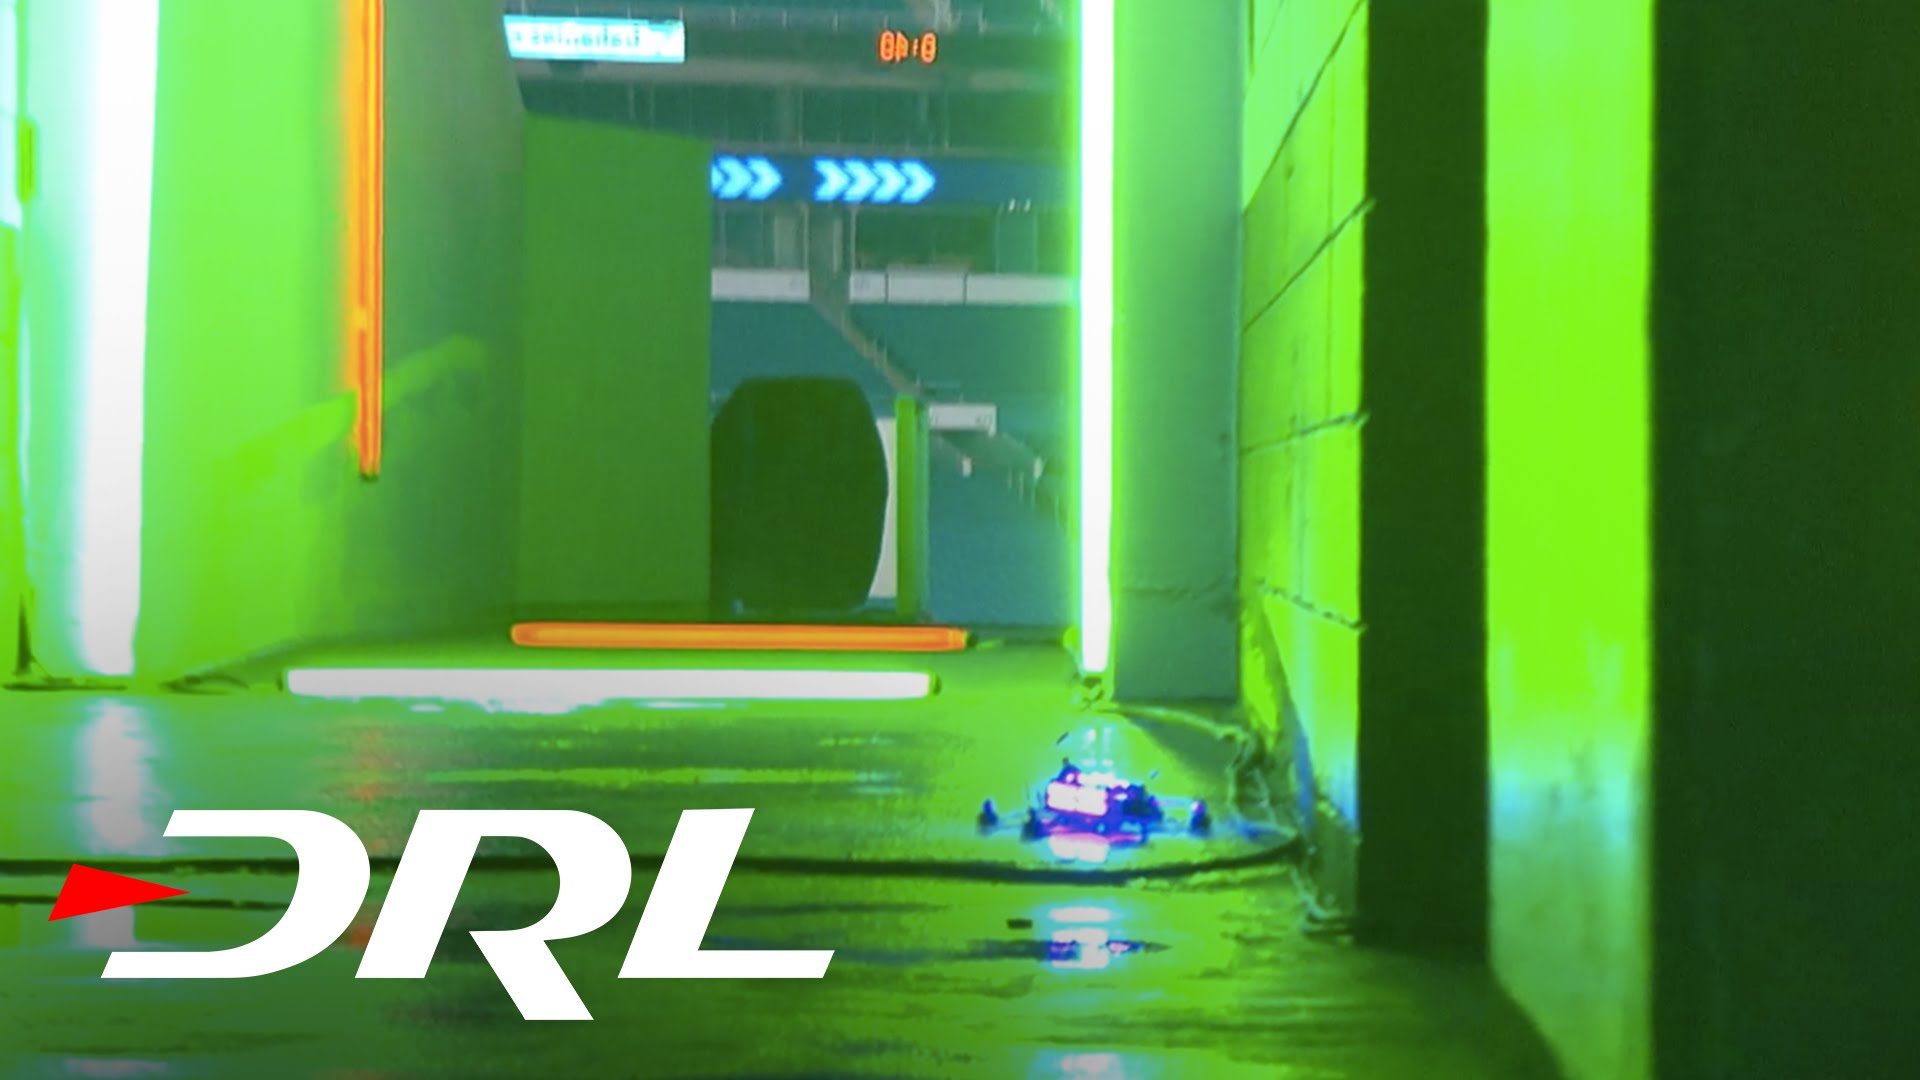 Drone Racing League | Episode 1: Qualifying Round (Level 1: Miami Lights) | DRL